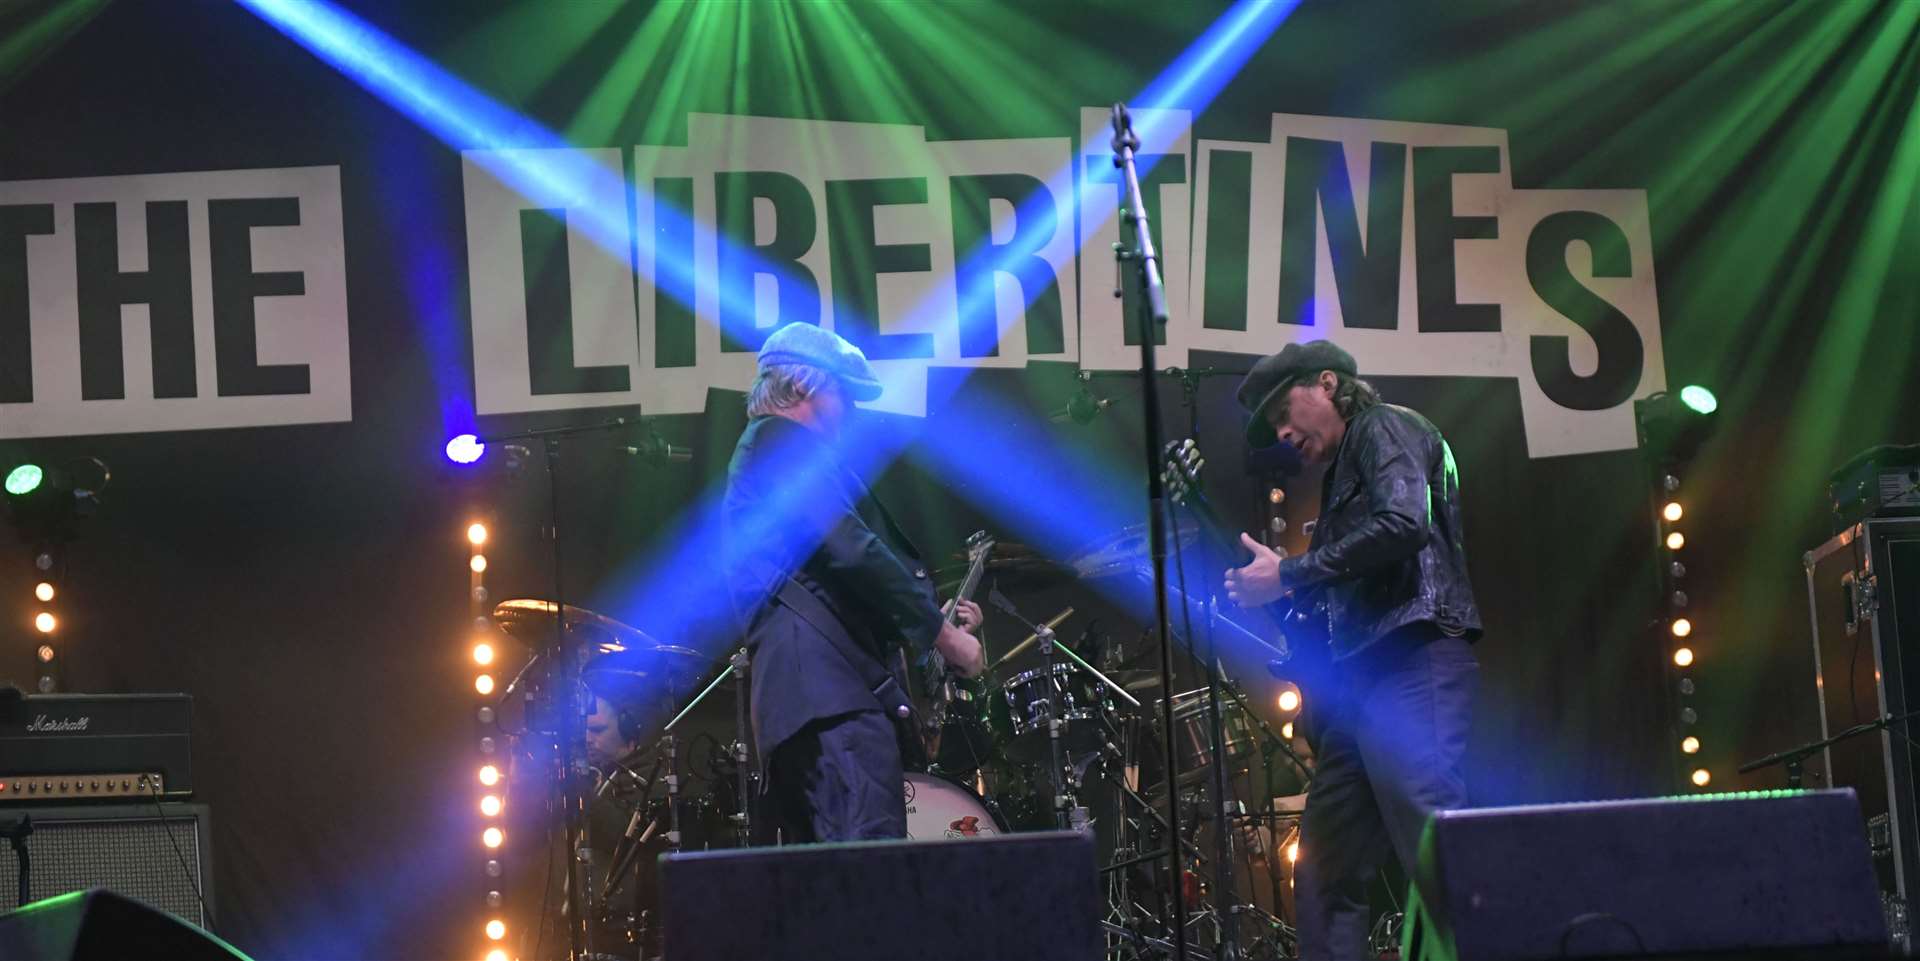 The Libertines headline the first night of the Castle Concerts Picture: Barry Goodwin